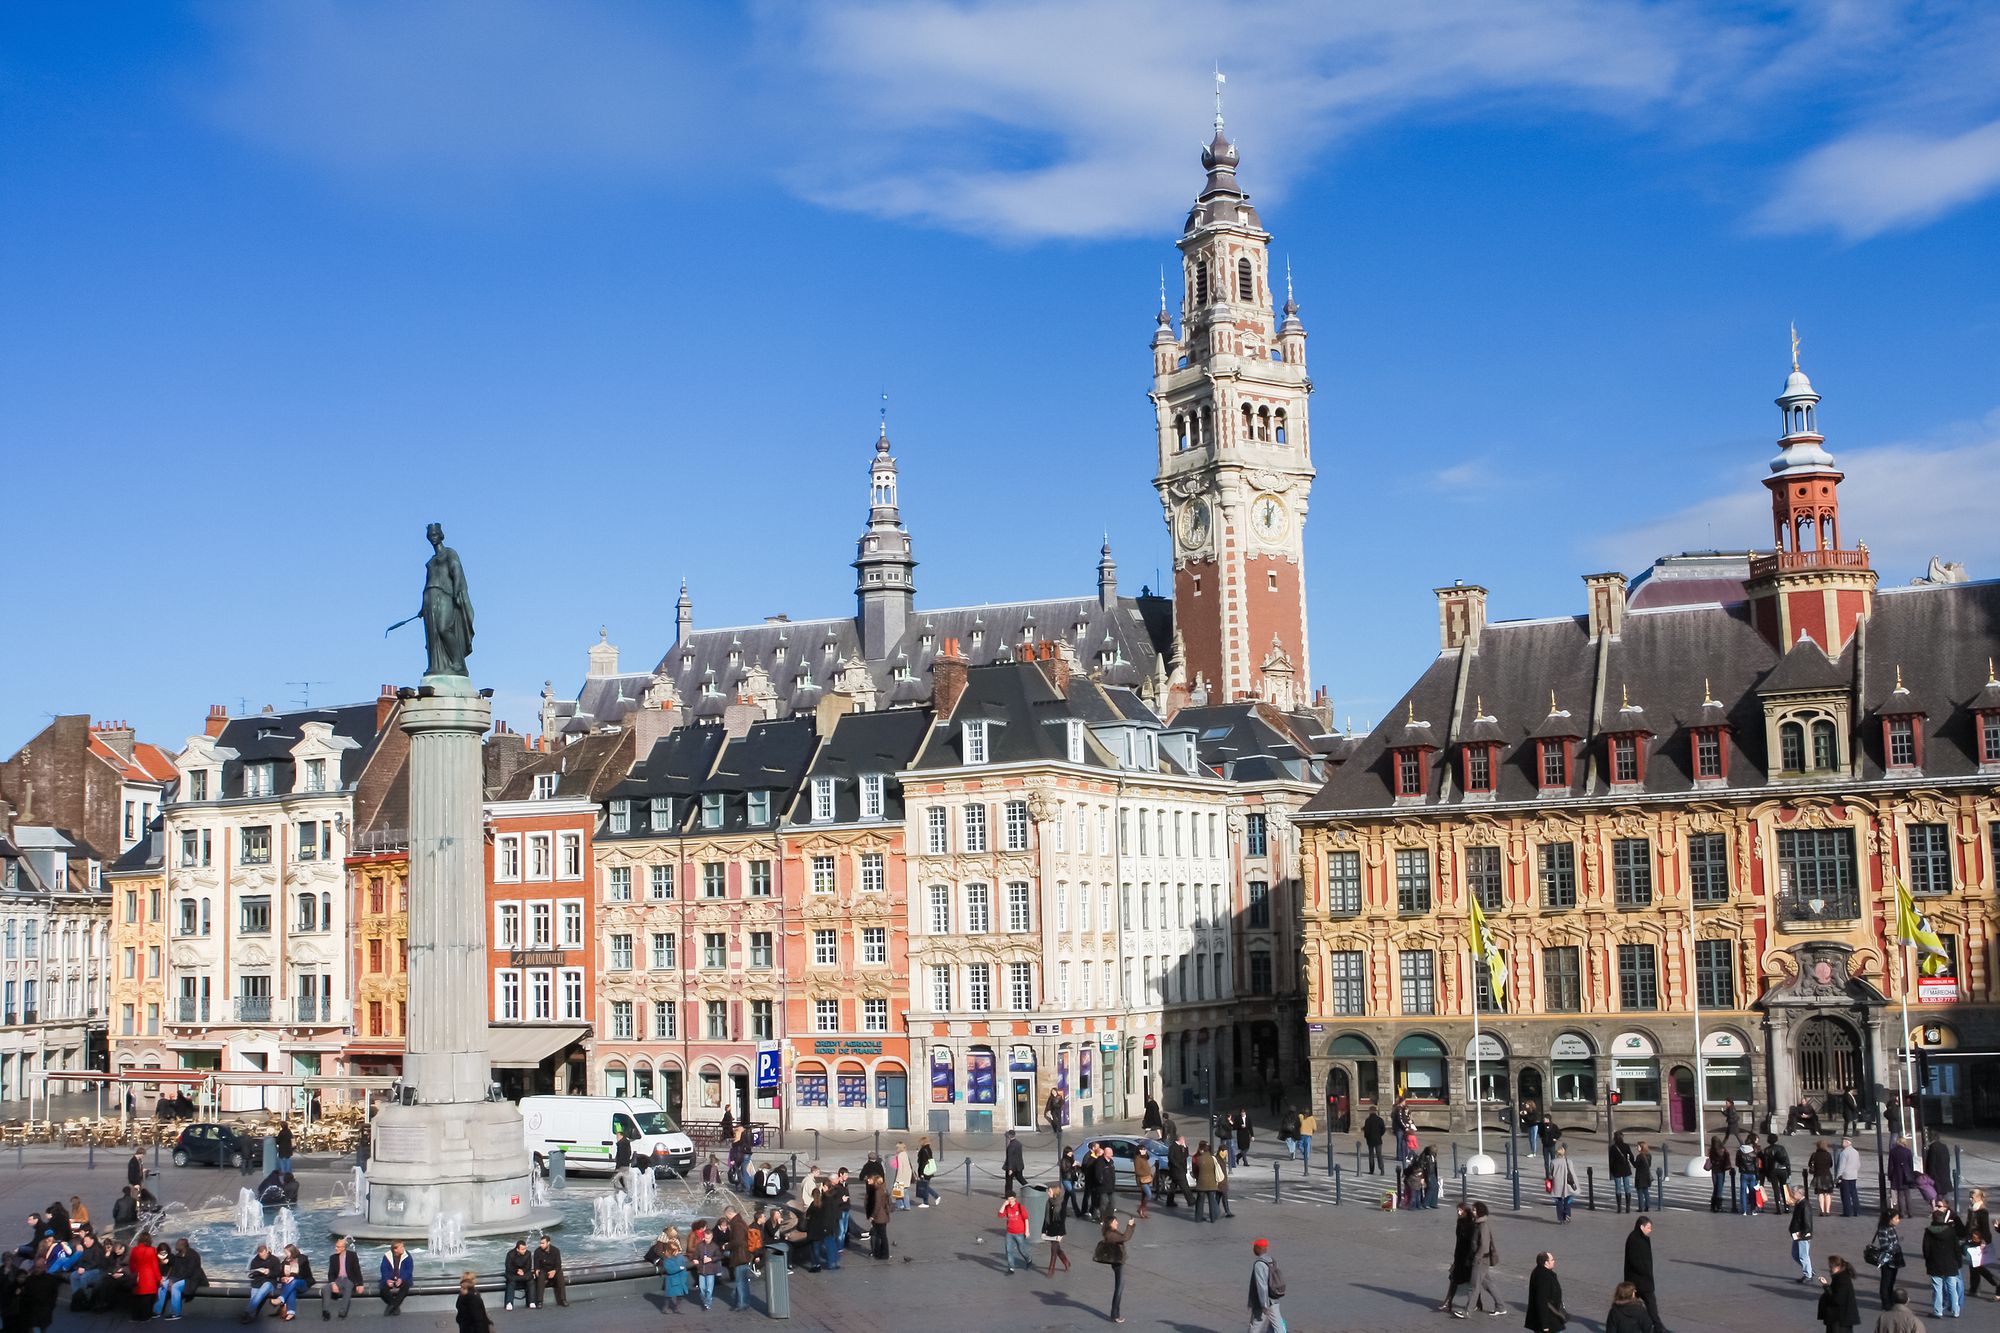 <p>There are certainly many points to think about when <a href="https://mydolcecasa.com/how-to-obtain-a-france-visa-residency-and-citizenship/">planning your move to France</a>, and your budget is usually top of mind. France is large and all its different areas offer a different lifestyle which comes with a different cost of living. So, what are the best cheap places to live in France? We’ve compiled a list of popular and lesser known cities and towns that are both affordable and nice to live in.</p><p><a href="https://mydolcecasa.com/the-best-neighborhoods-in-paris/">Paris</a> remains the most popular place for foreigners to settle, but this definitely comes at a steep price. For many, the idea of living in France is appealing, but it also needs to be an affordable dream. Luckily there are a number of places in France where your money will go further and they are beautiful and desirable places to live.</p><p>The following are the 10 best cheap places to live in France:</p>